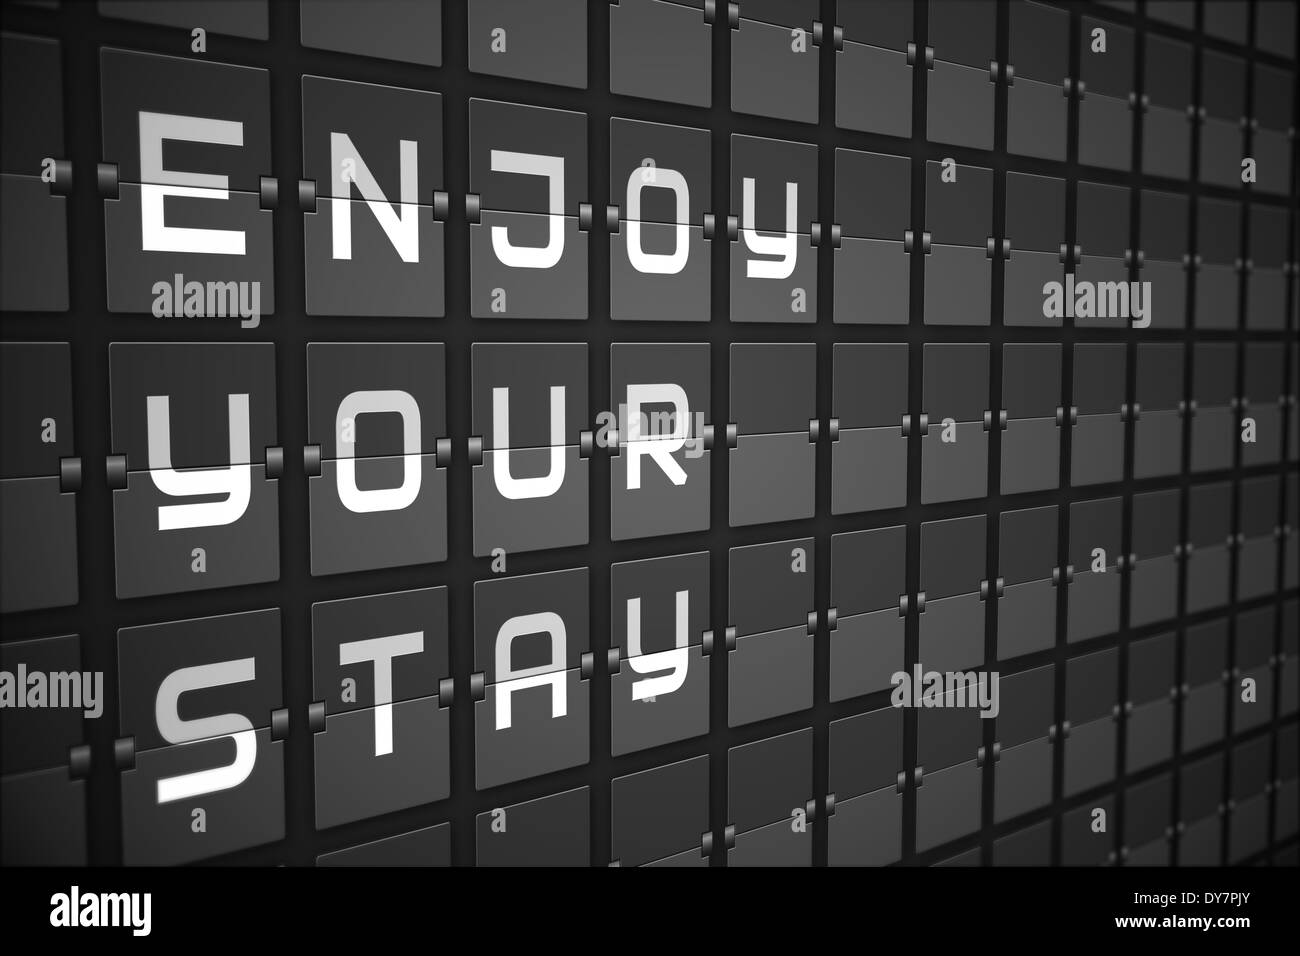 Enjoy your stay on black mechanical board Stock Photo